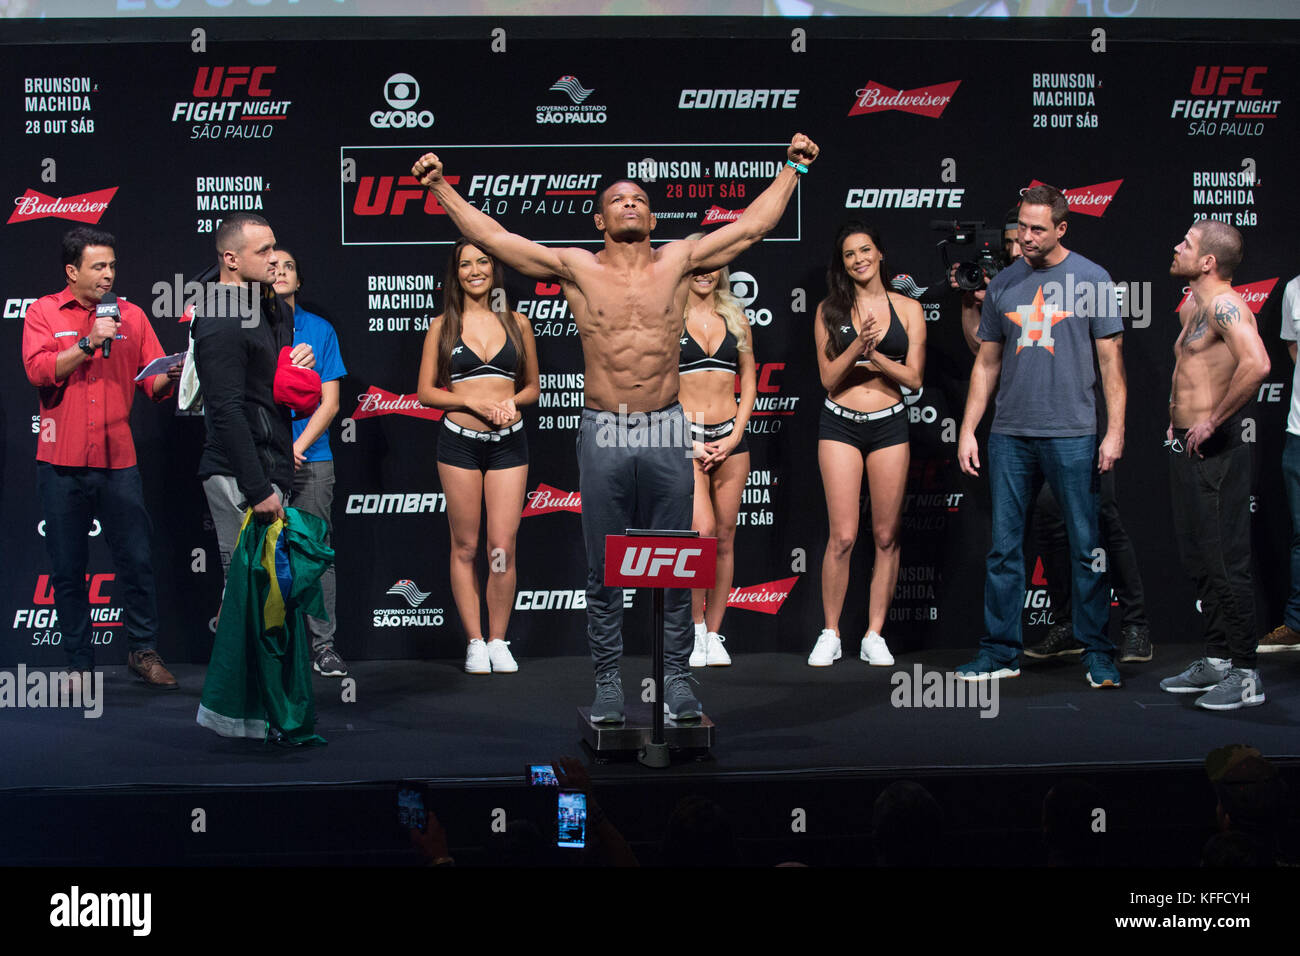 São Paulo, Brazil. 27th October, 2017. UFC fighter Francisco Trinaldo of Brazil poses on the scale after weighing in the UFC weigh-in event prior to the UFC Fight Night Sao Paulo, at the Ibirapuera Gymnasium. Paulo Lopes/BW Press/Alamy Live News Stock Photo